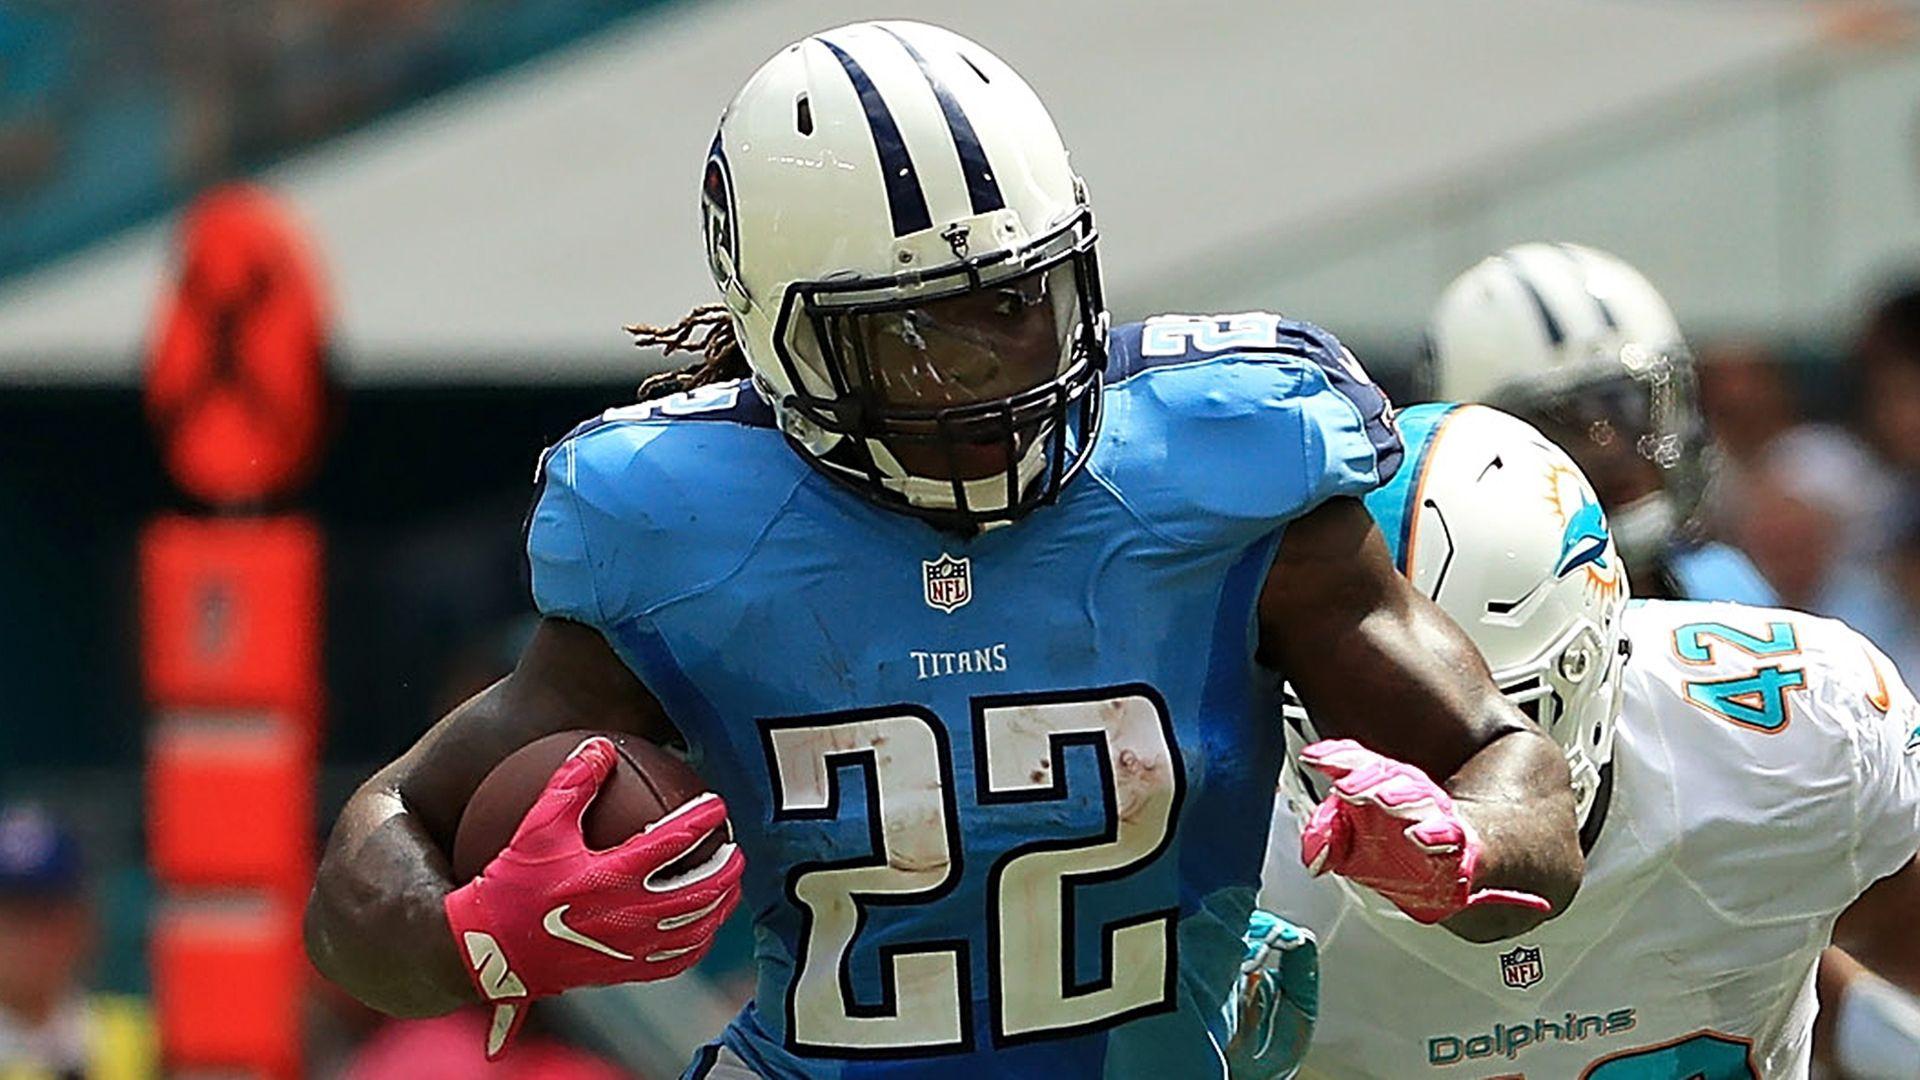 Trading for Derrick Henry could mean a fantasy title